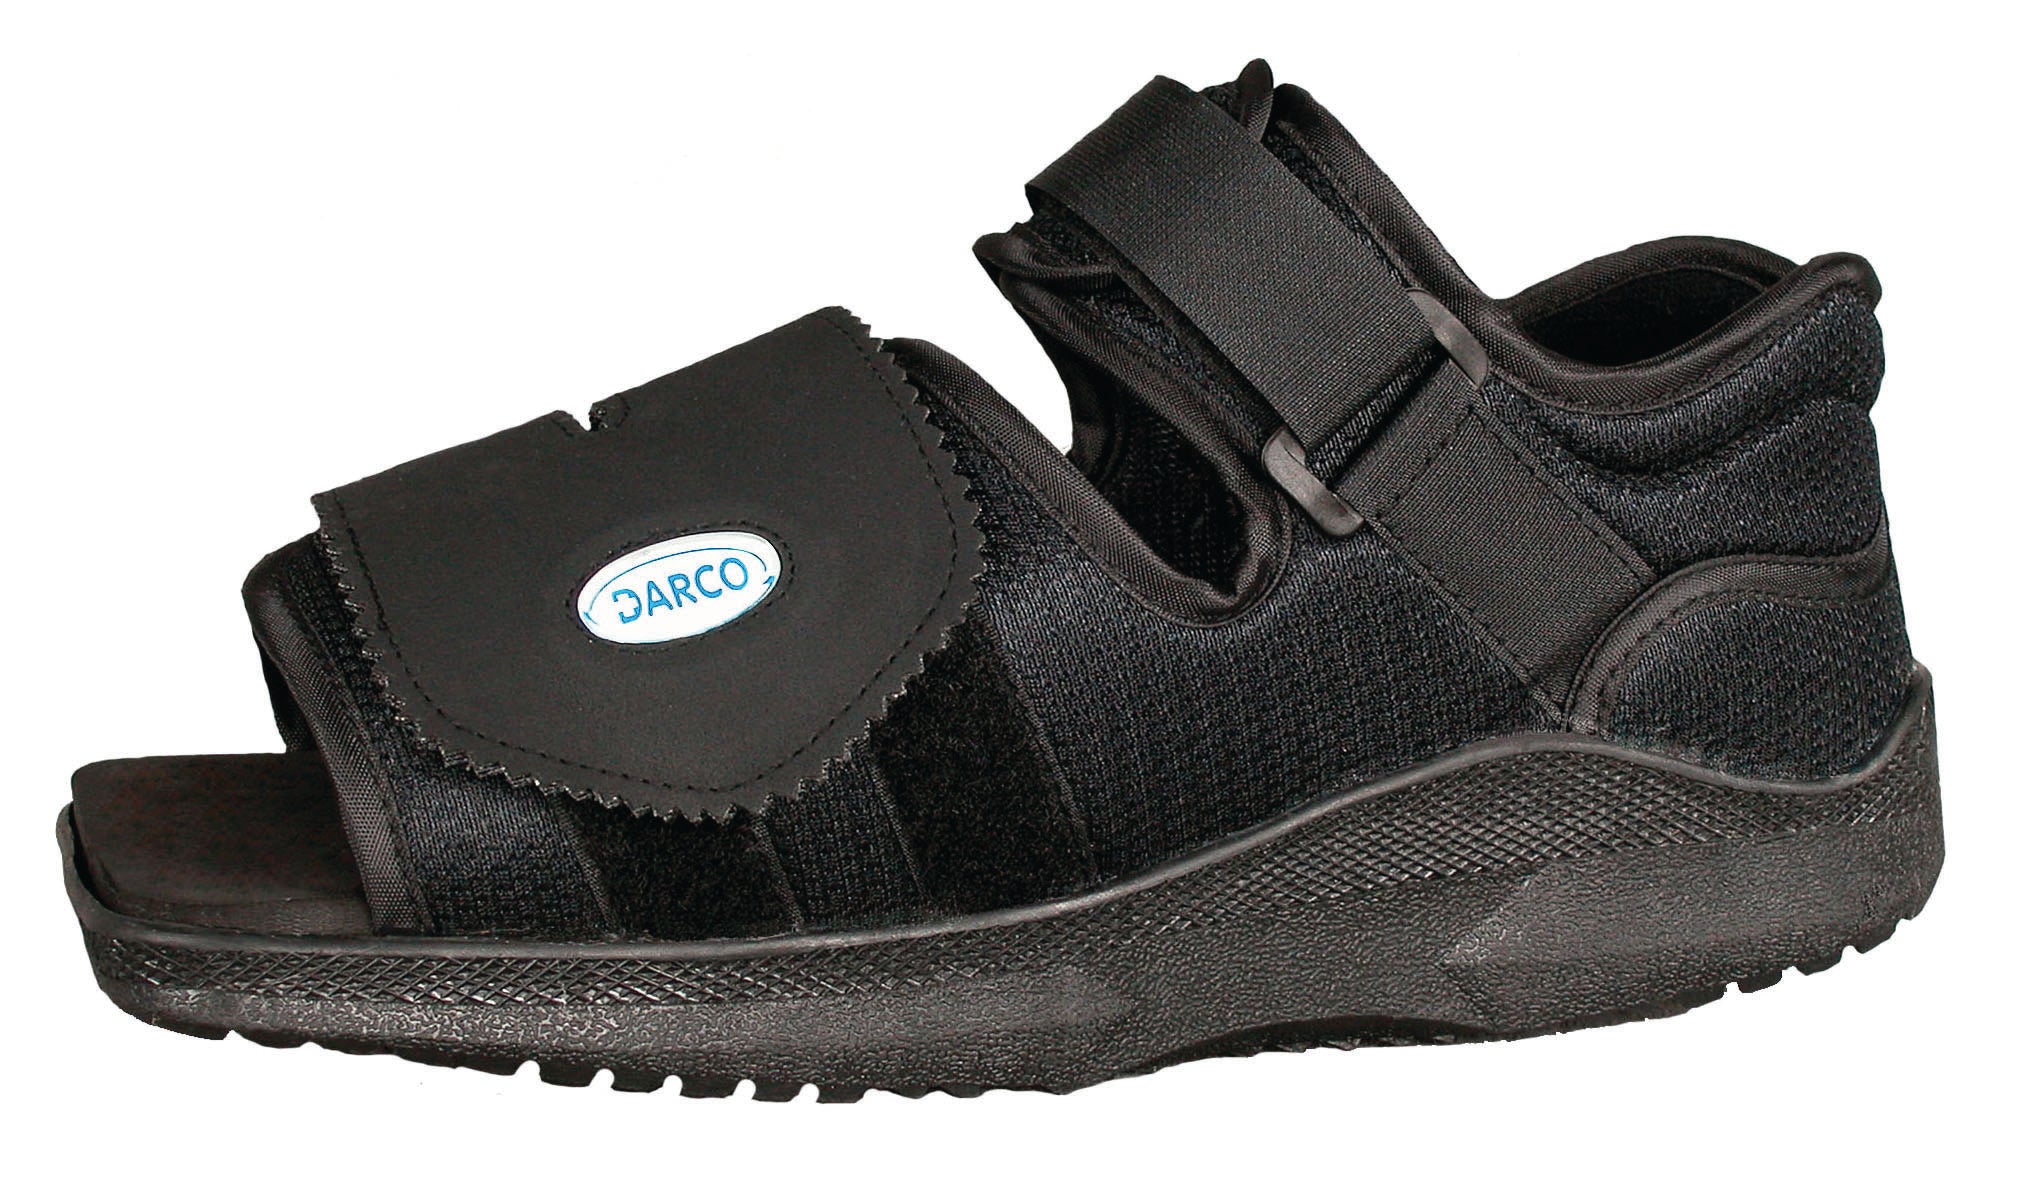 Darco Med-surg Shoe Black Square-toe Women's Large - All Care Store 